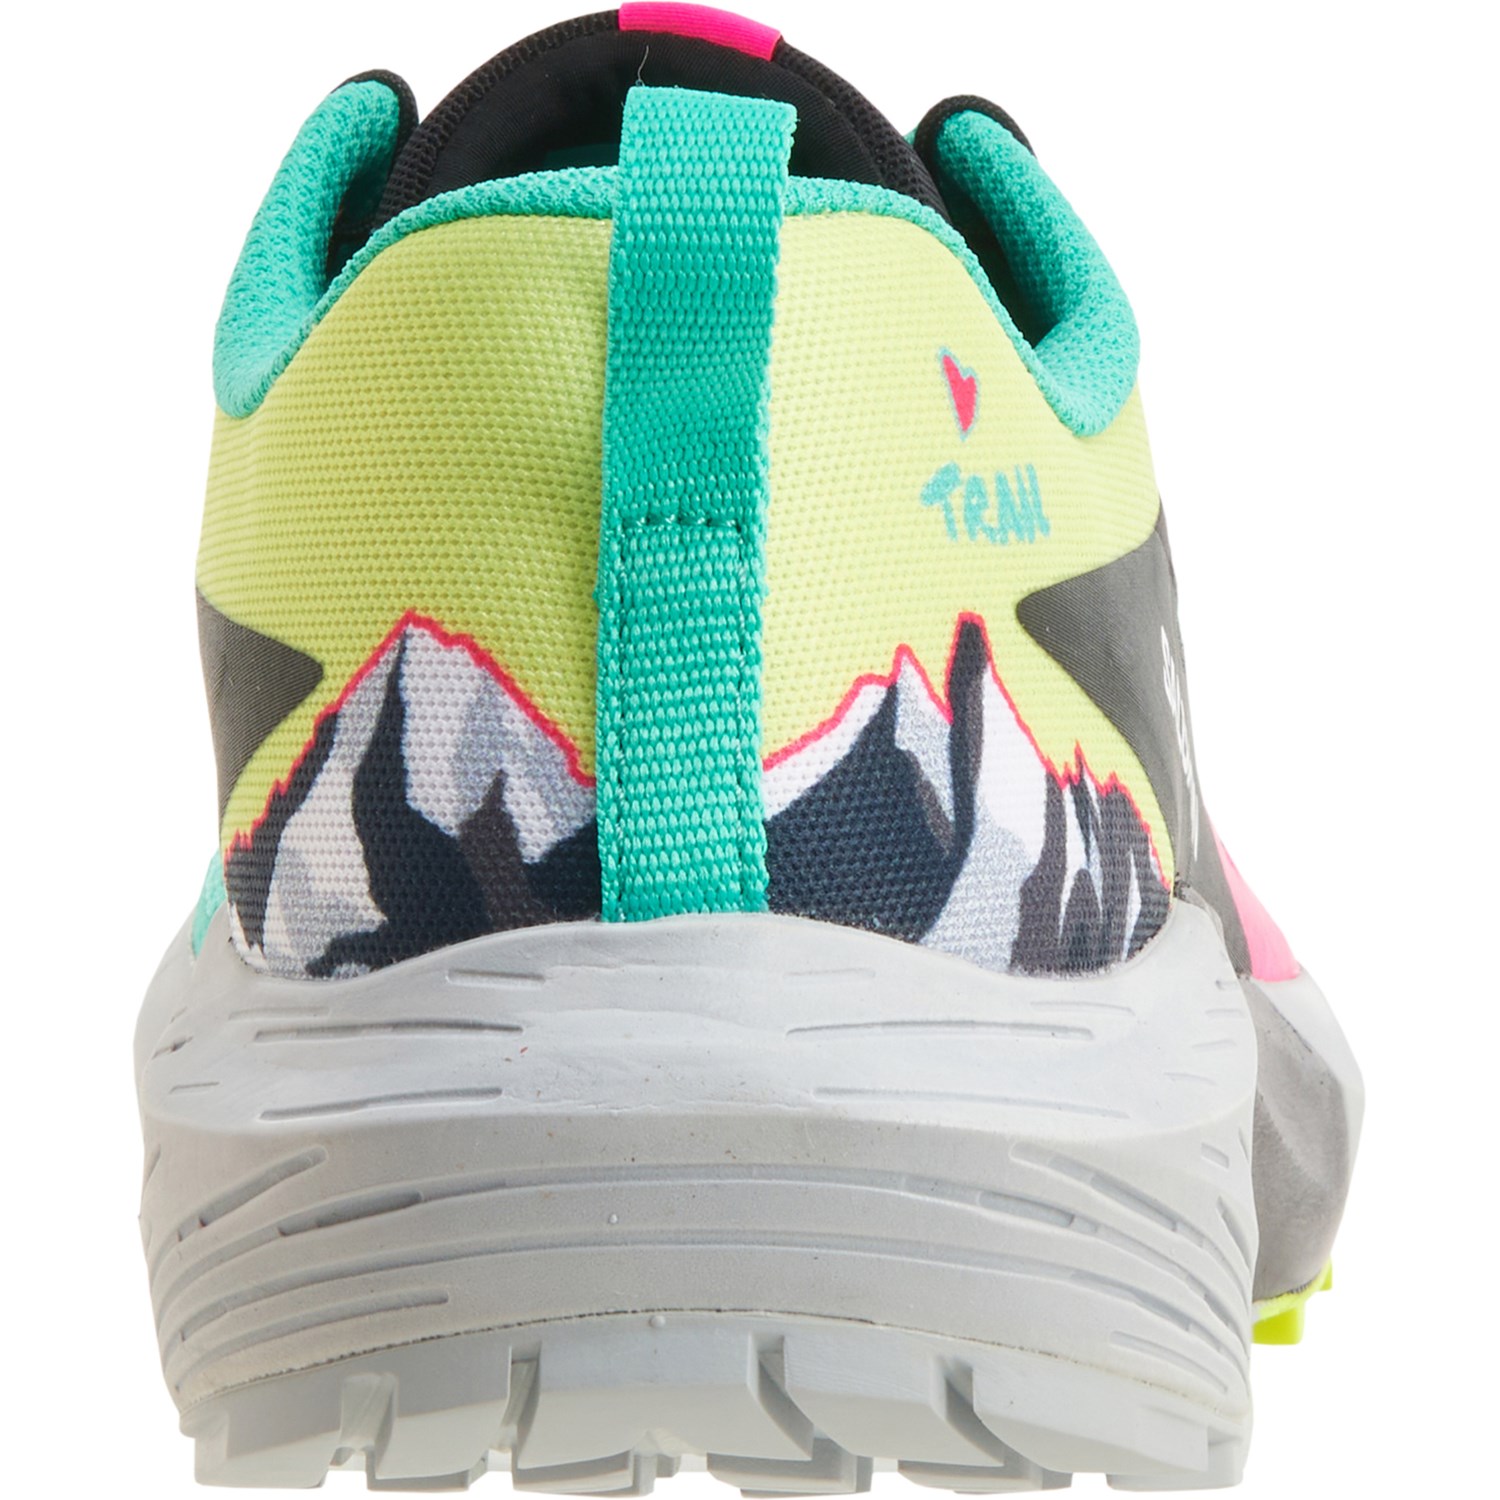 Sense Ride 5 Trail-Running Shoes - Martina Limited Edition - Women's